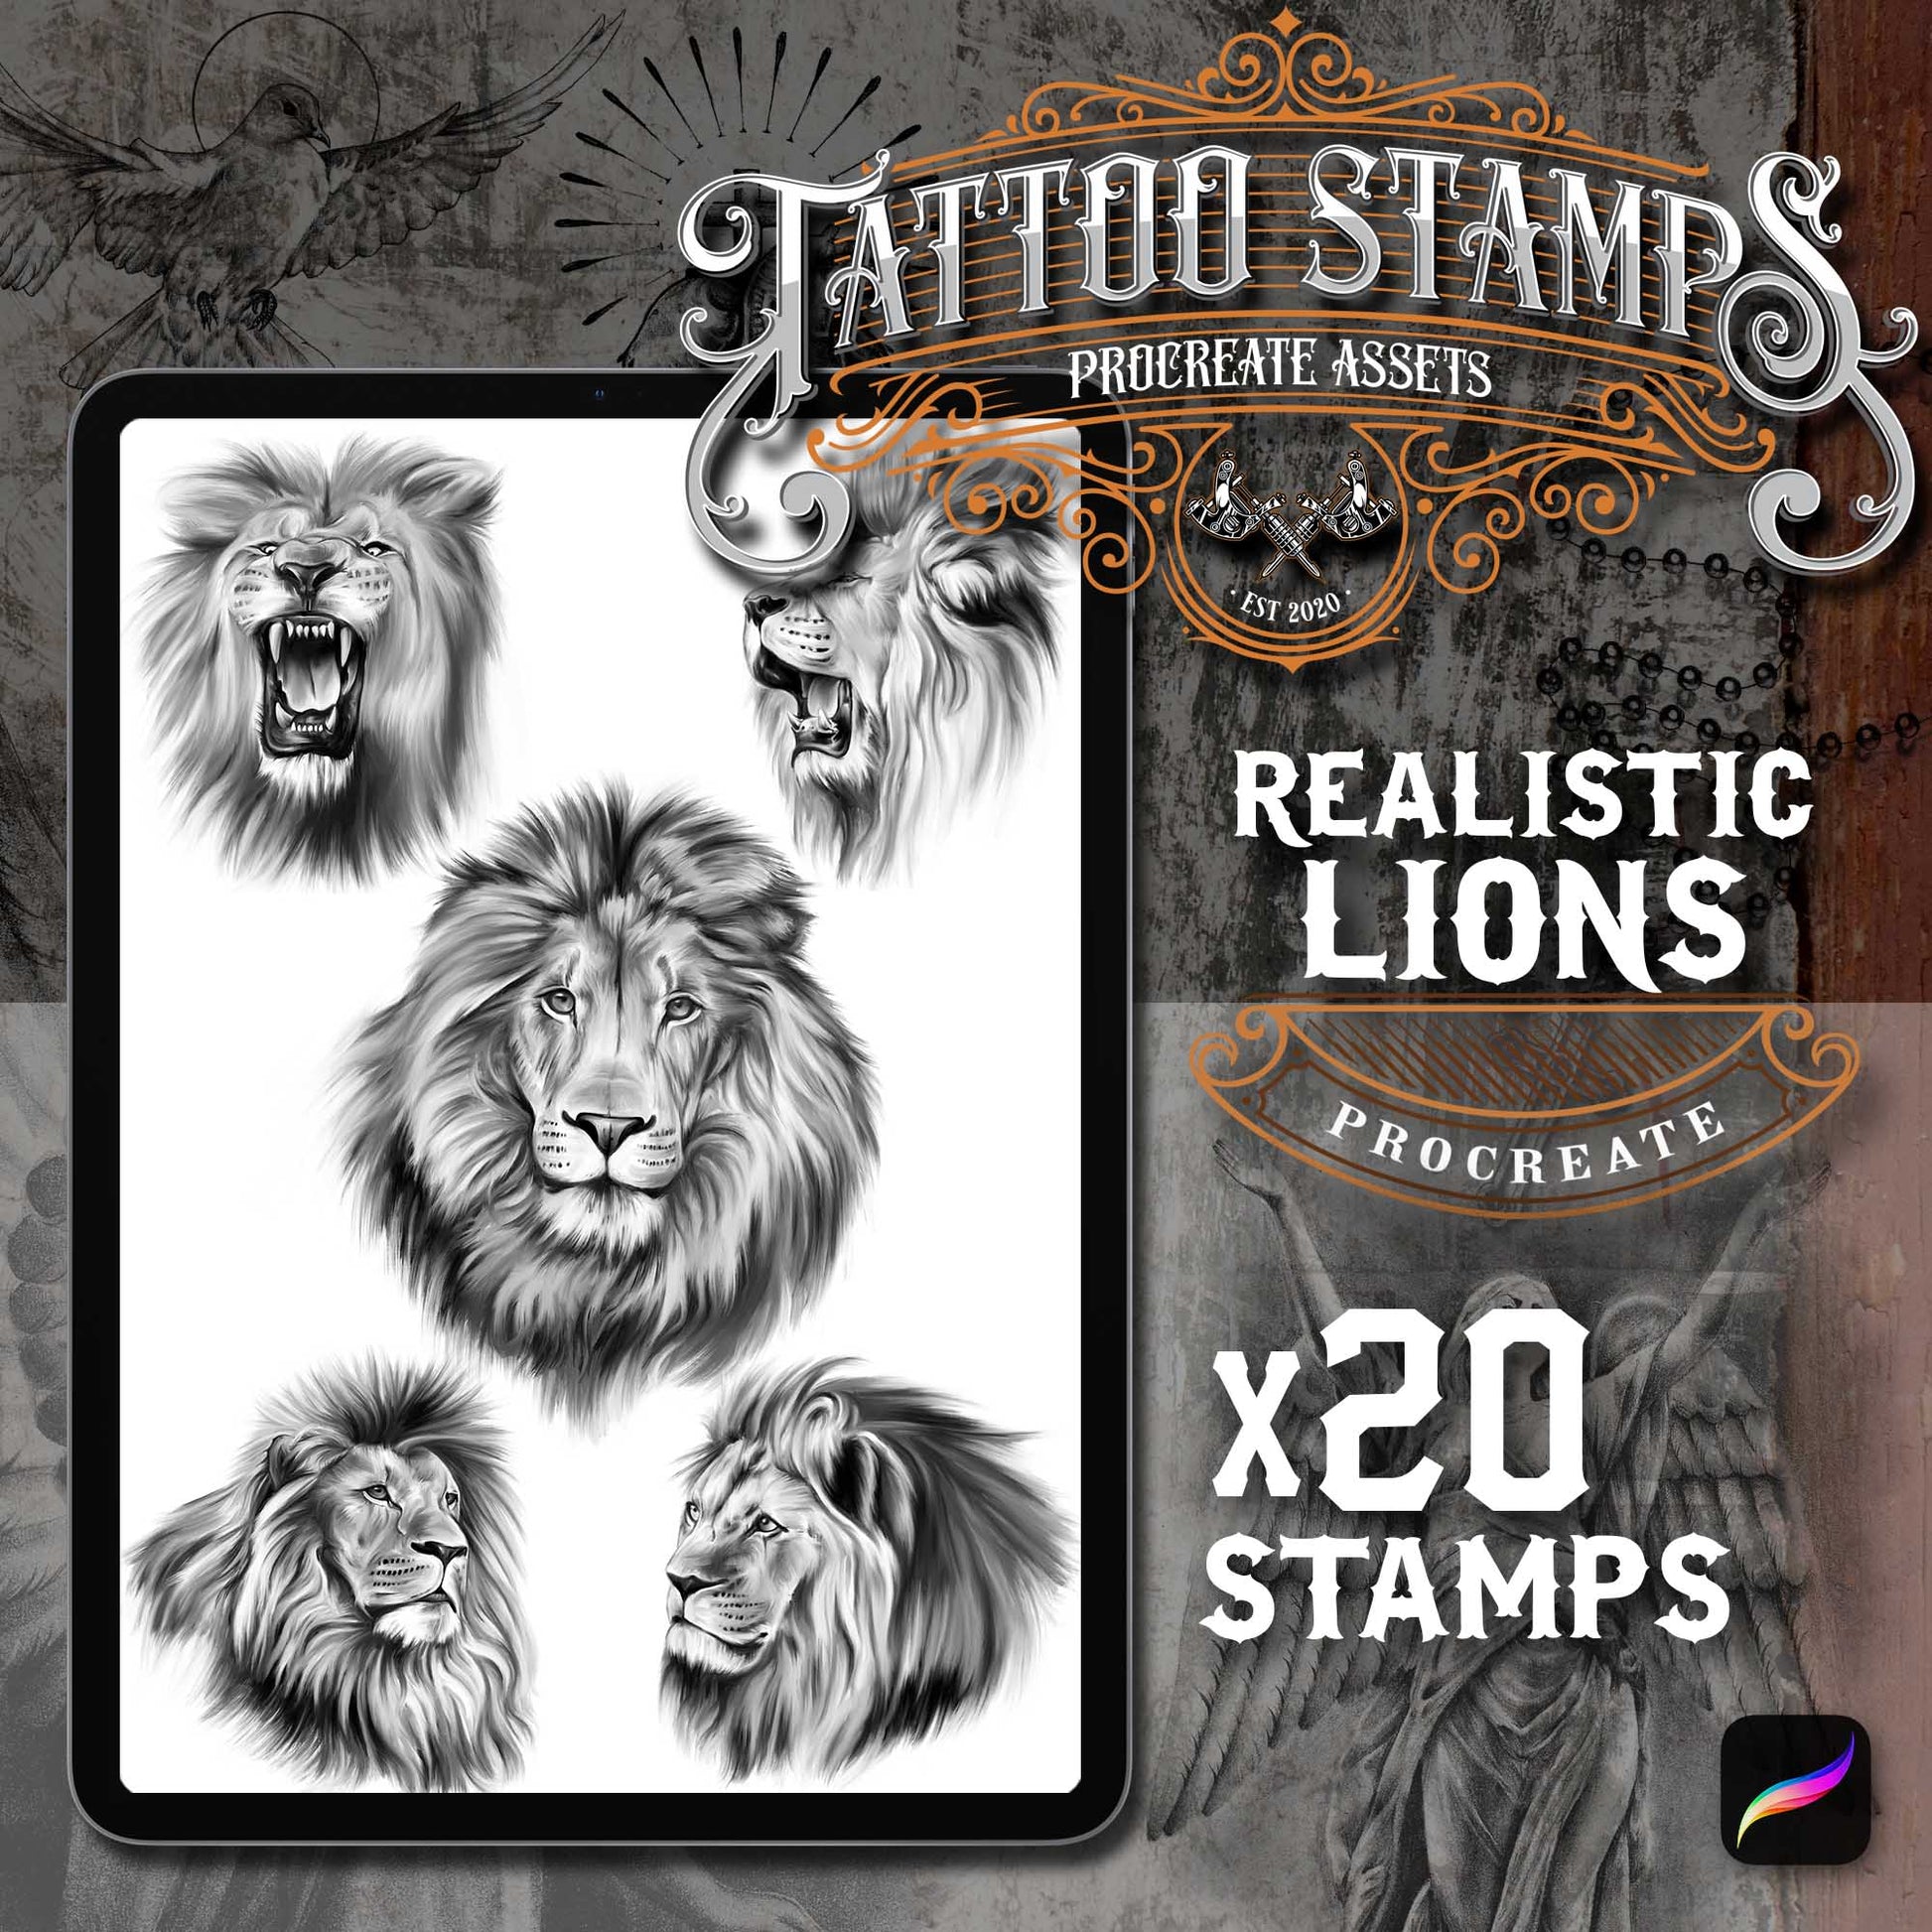 20 Realistic Black & Grey Lions Tattoo Procreate app for iPad & iPad pro  in the Master Pack by TattooStampsArt